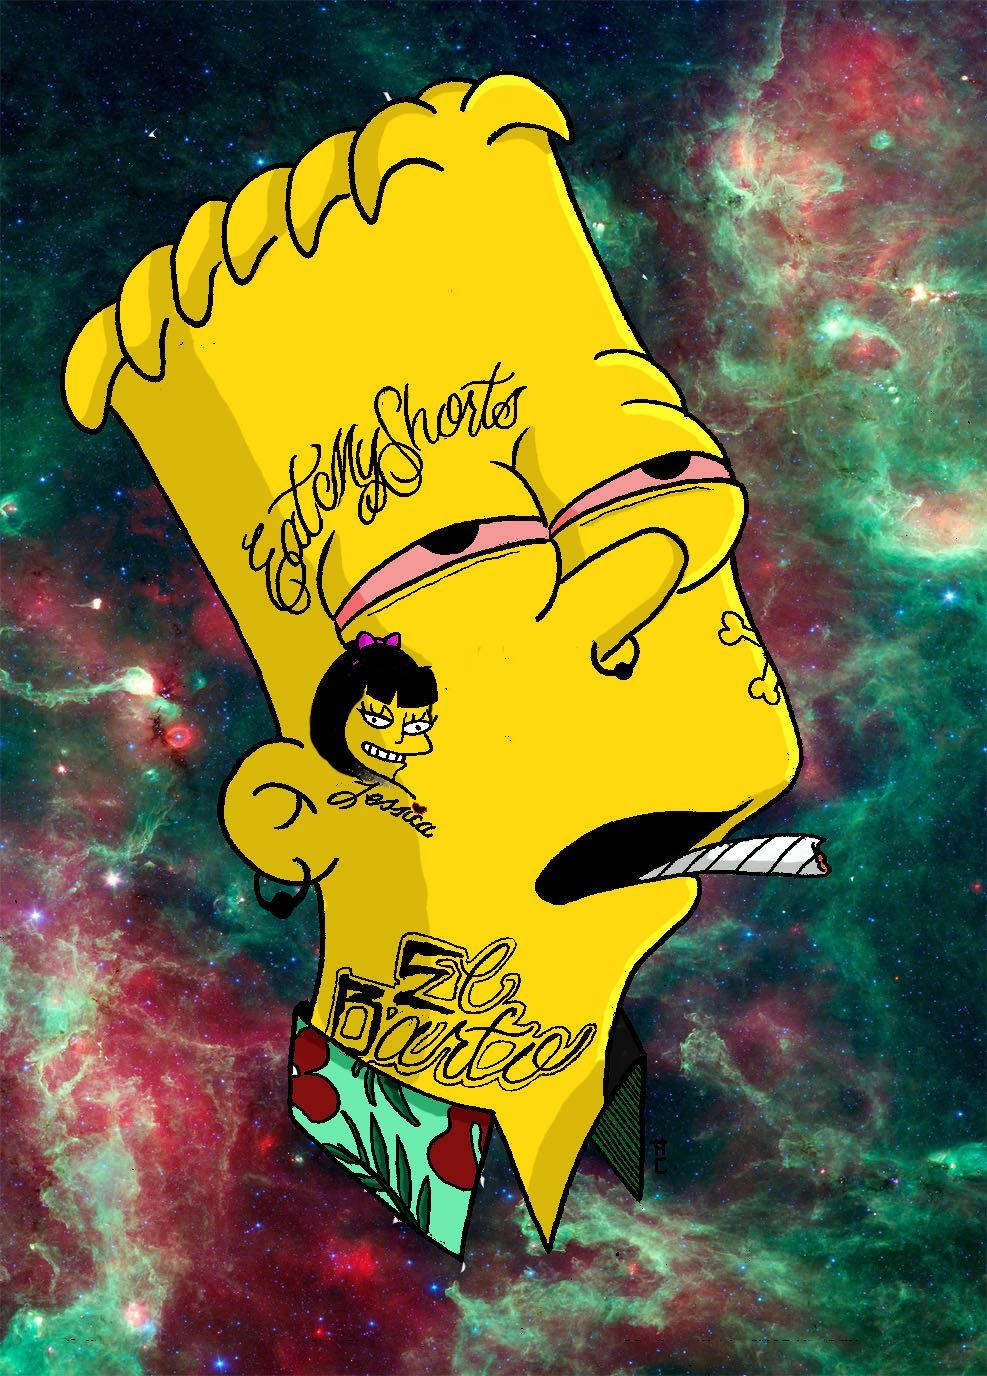 https://wallpapers.com/images/hd/bart-simpson-swag-5dbmmb7g7gt74h1q.jpg